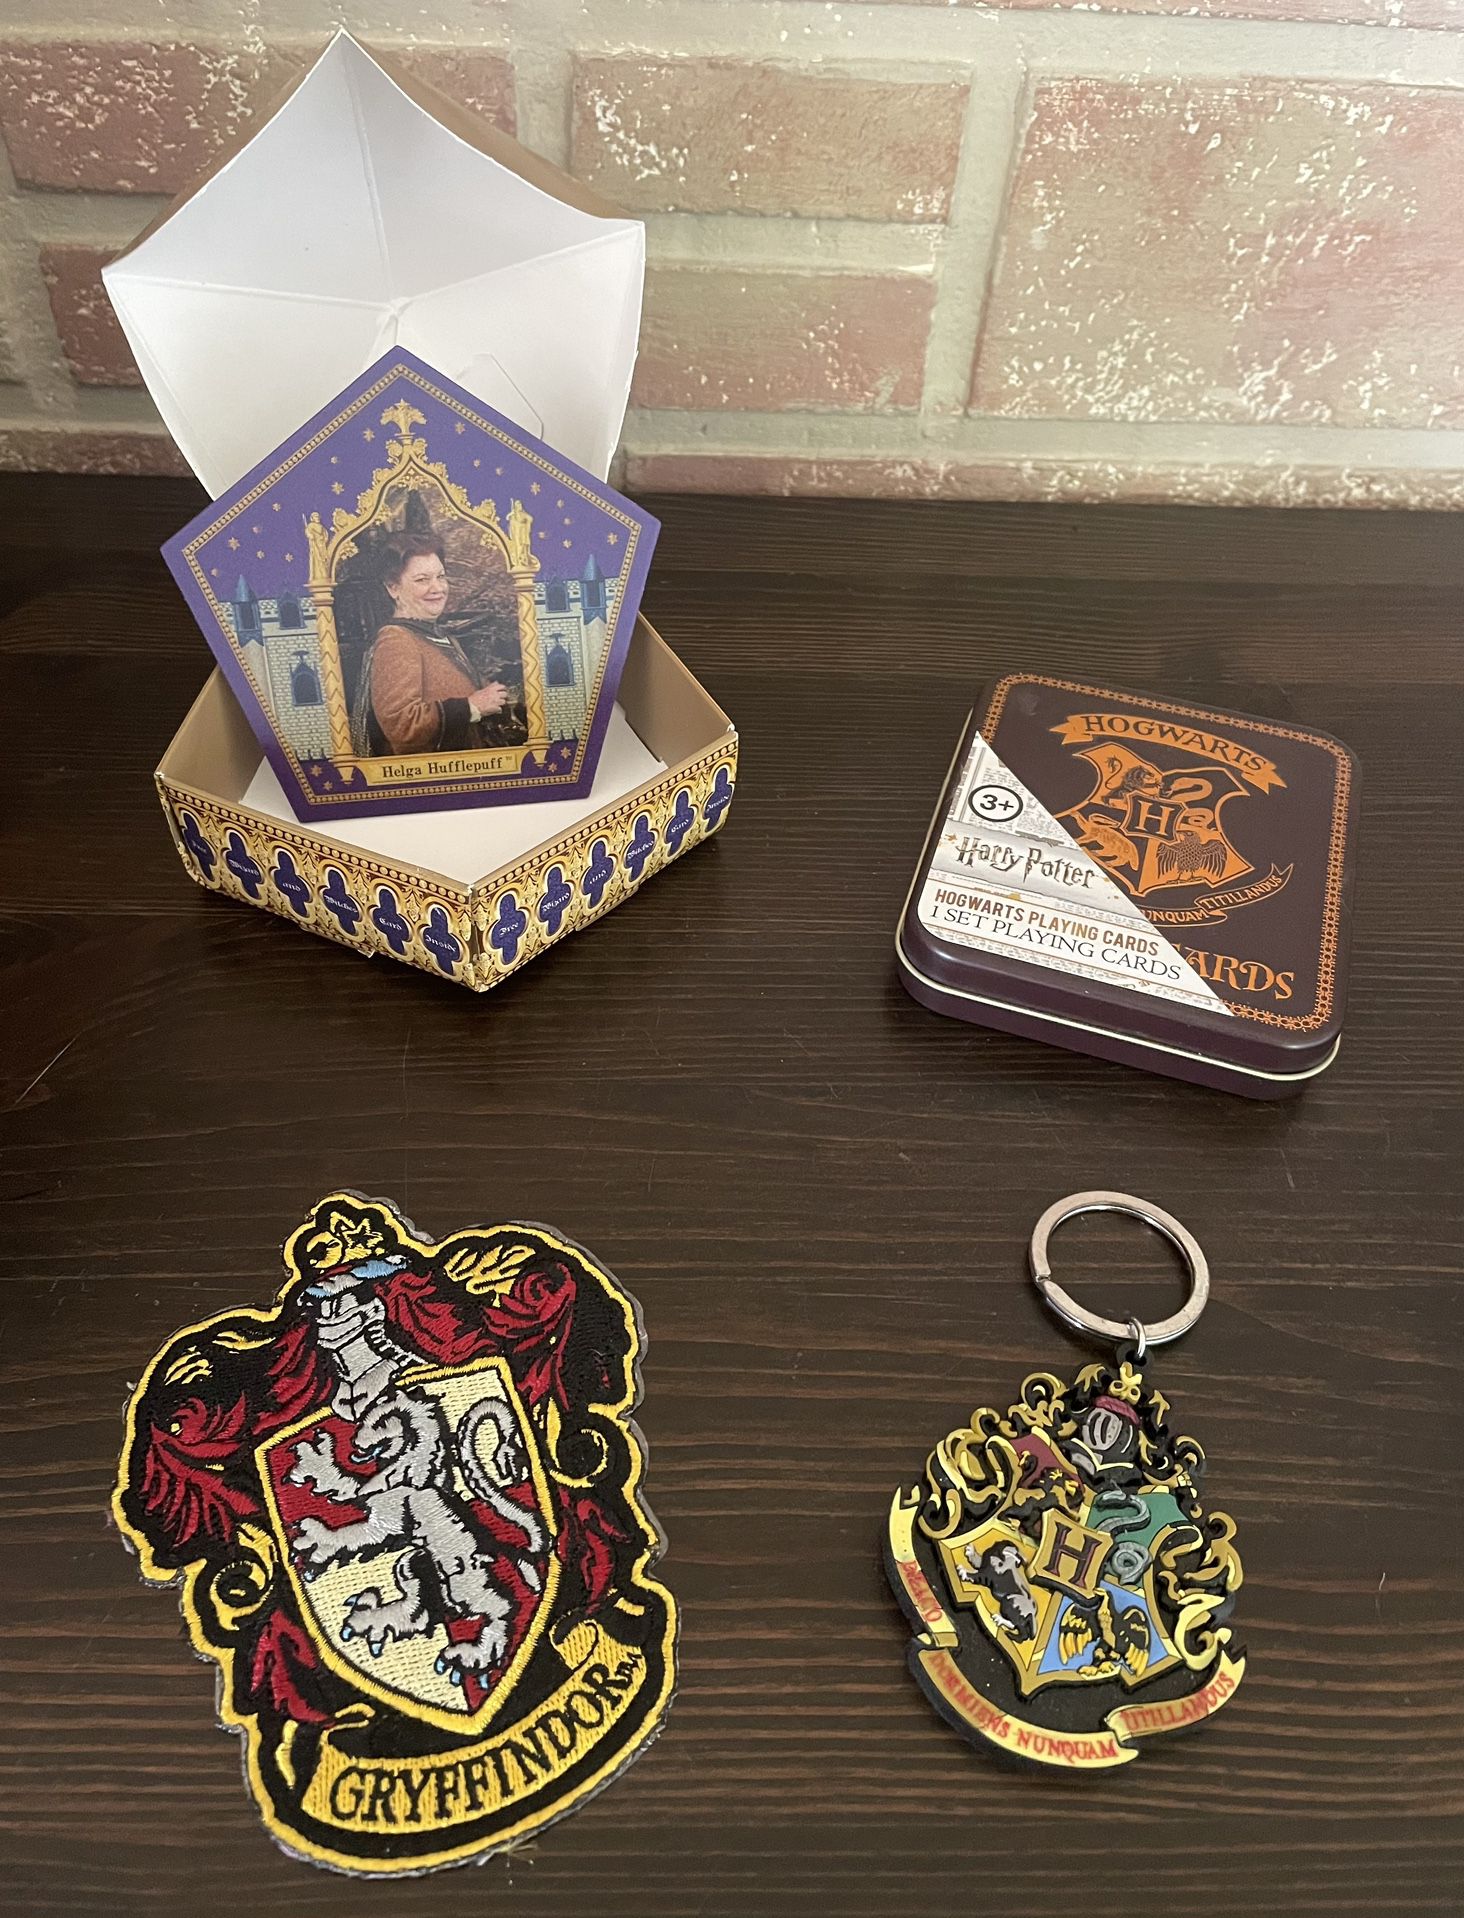  Harry Potter Gryffindor Patch, New Playing Cards, Keychain, Empty Box with Card.